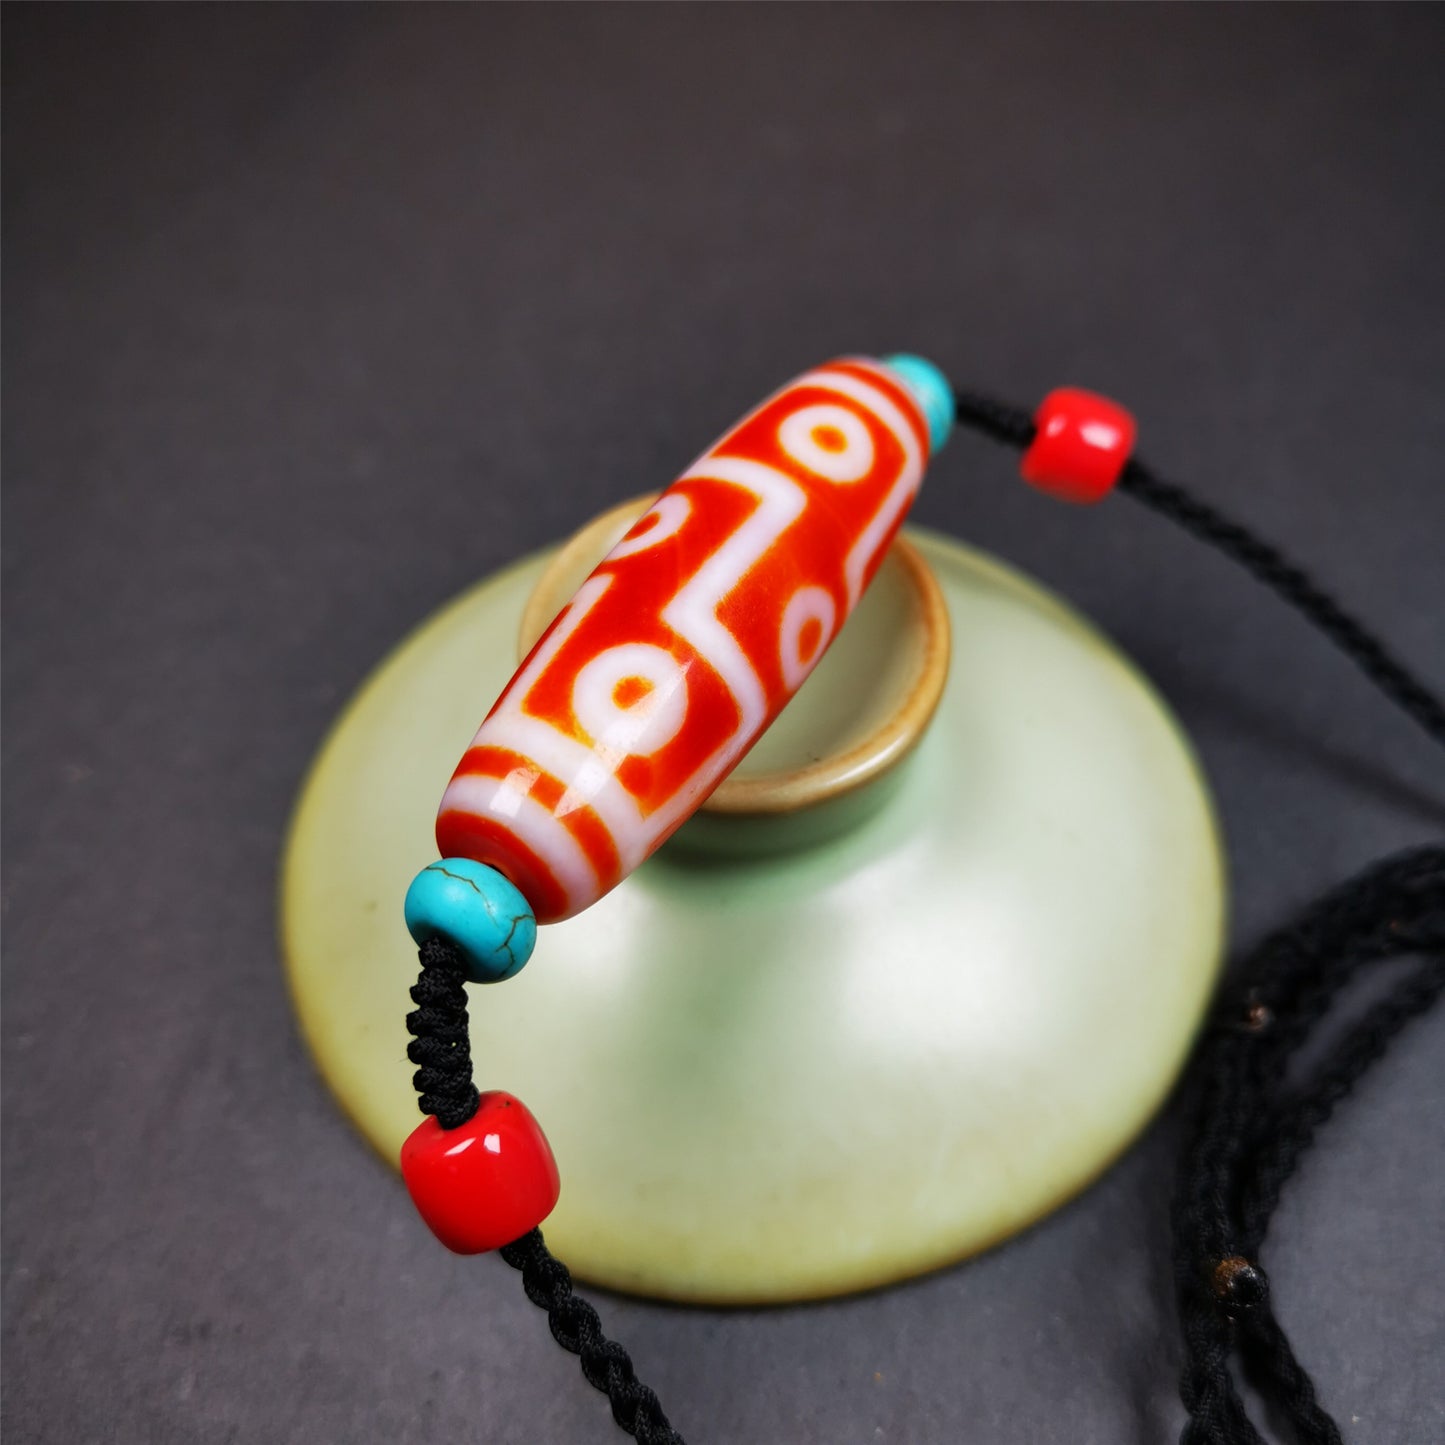 This necklace was hand-woven by Tibetans from Baiyu County, the main bead is a fire agate 9 eyes dzi, paired with 2 turquoise beads and 2 red agate beads,about 30 years old. The length of the necklace can be adjusted.